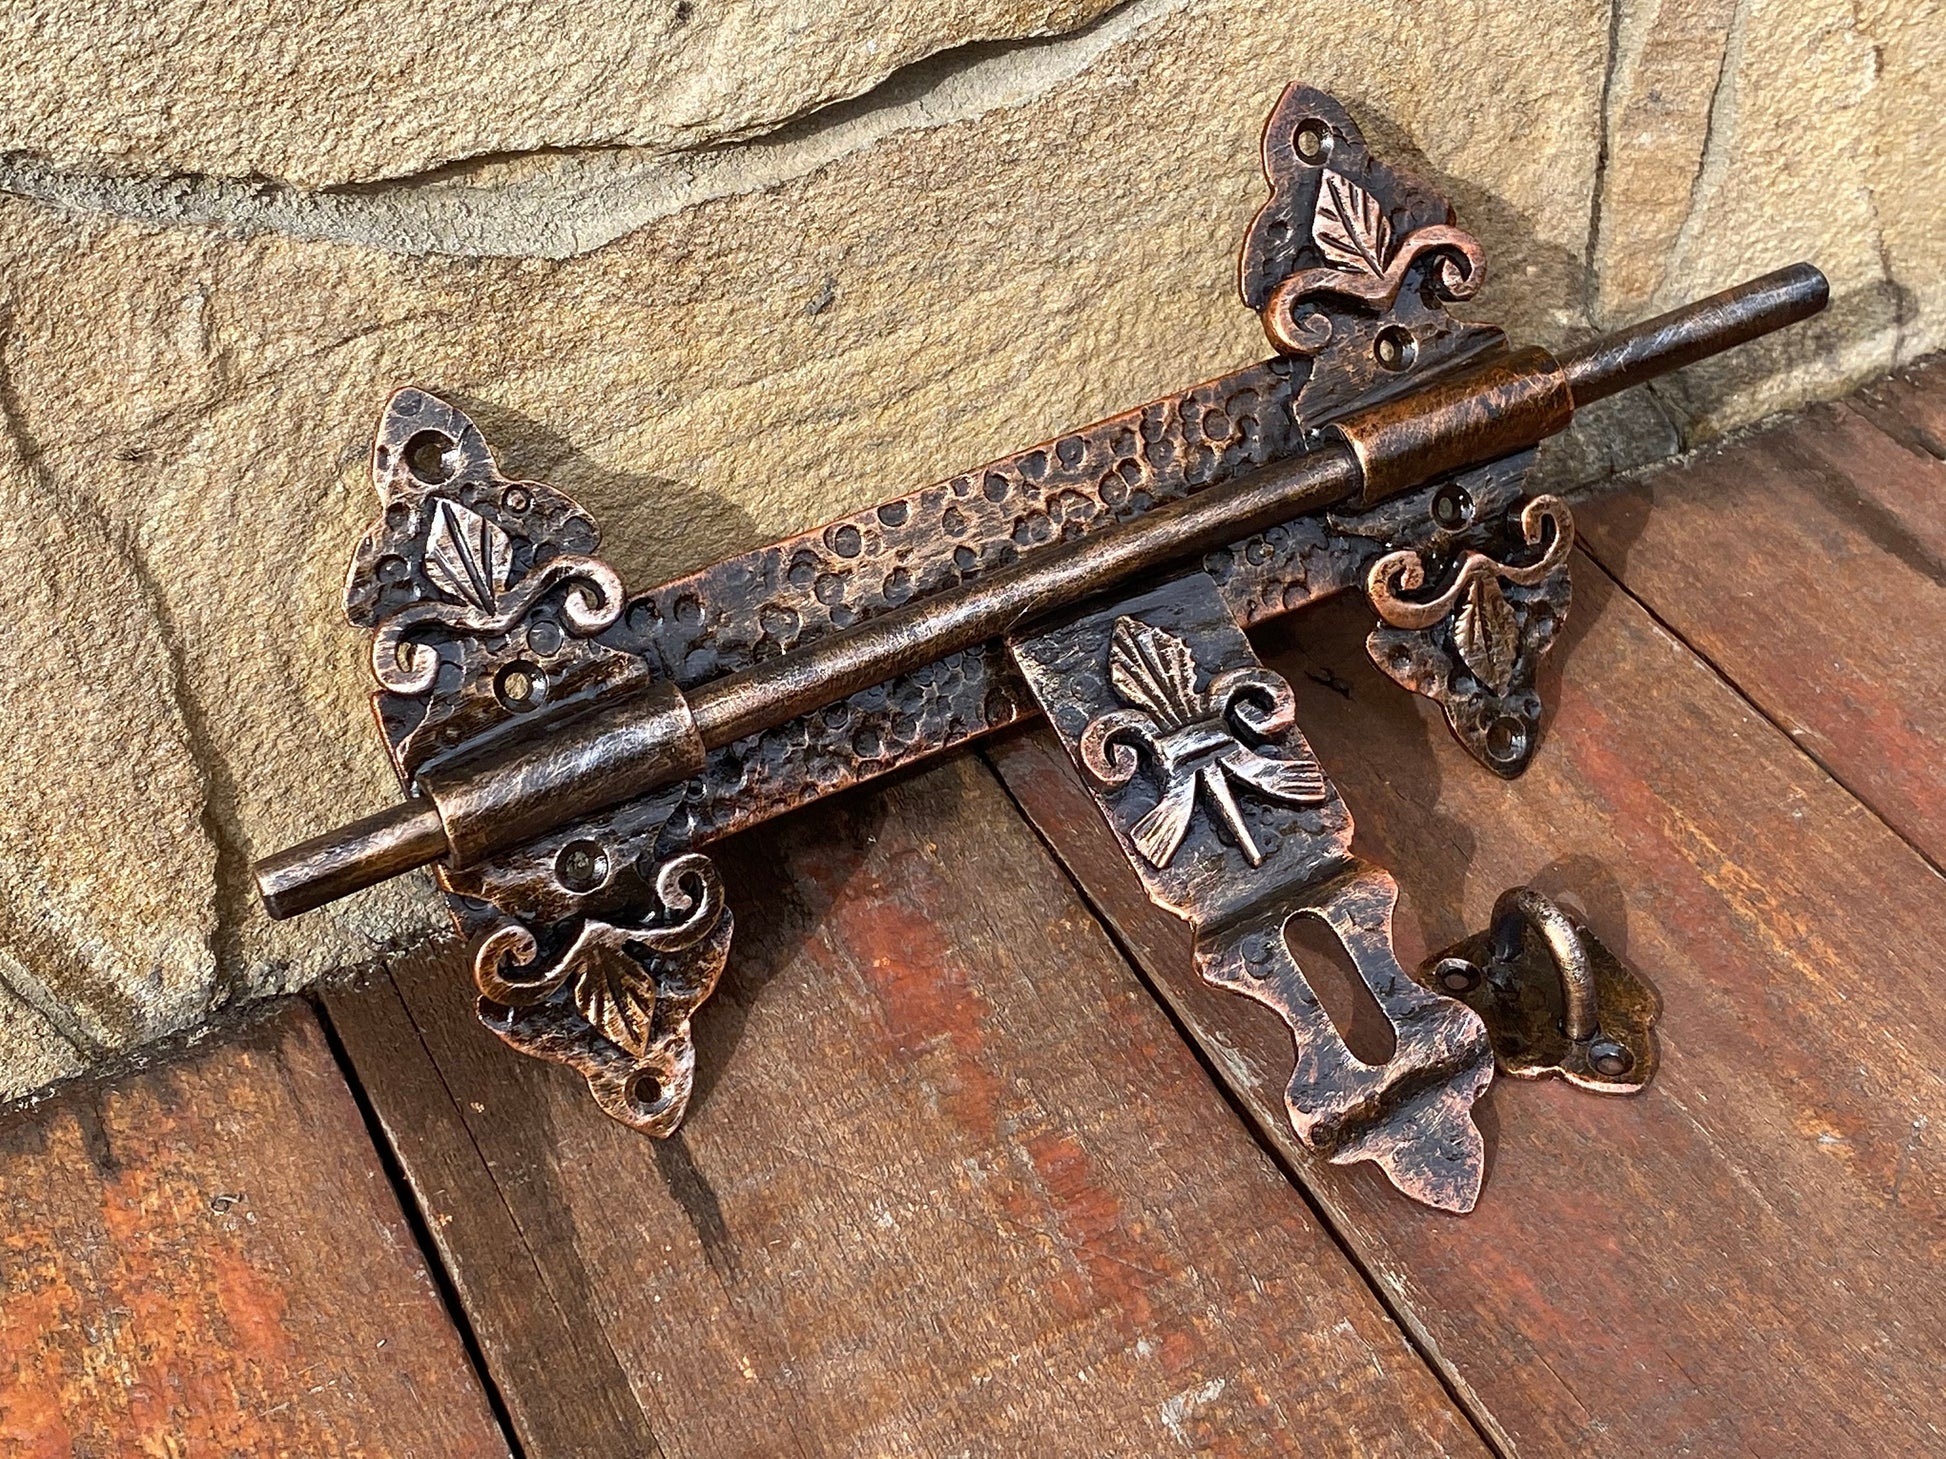 Latch, gate, door, shed, barn, medieval, hinge, Middle Ages, renovation, antique, viking, Christmas, anniversary, birthday, DIY, garden